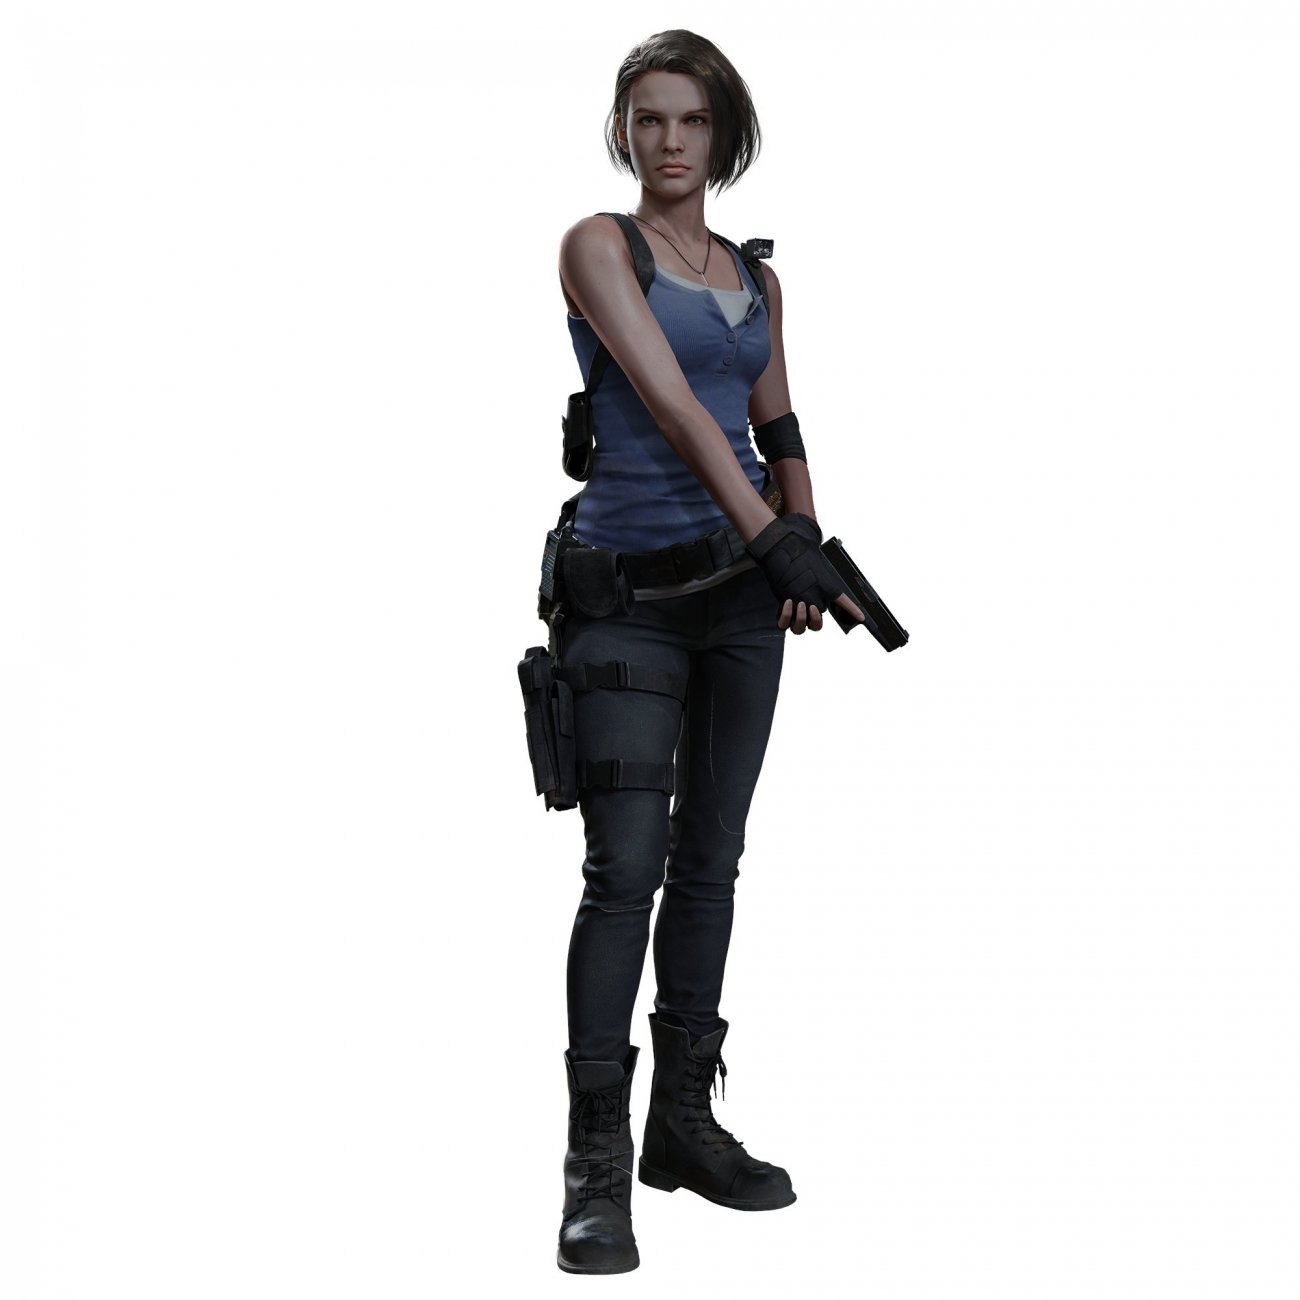 Resident Evil 3 producer explains why they redesigned Jill